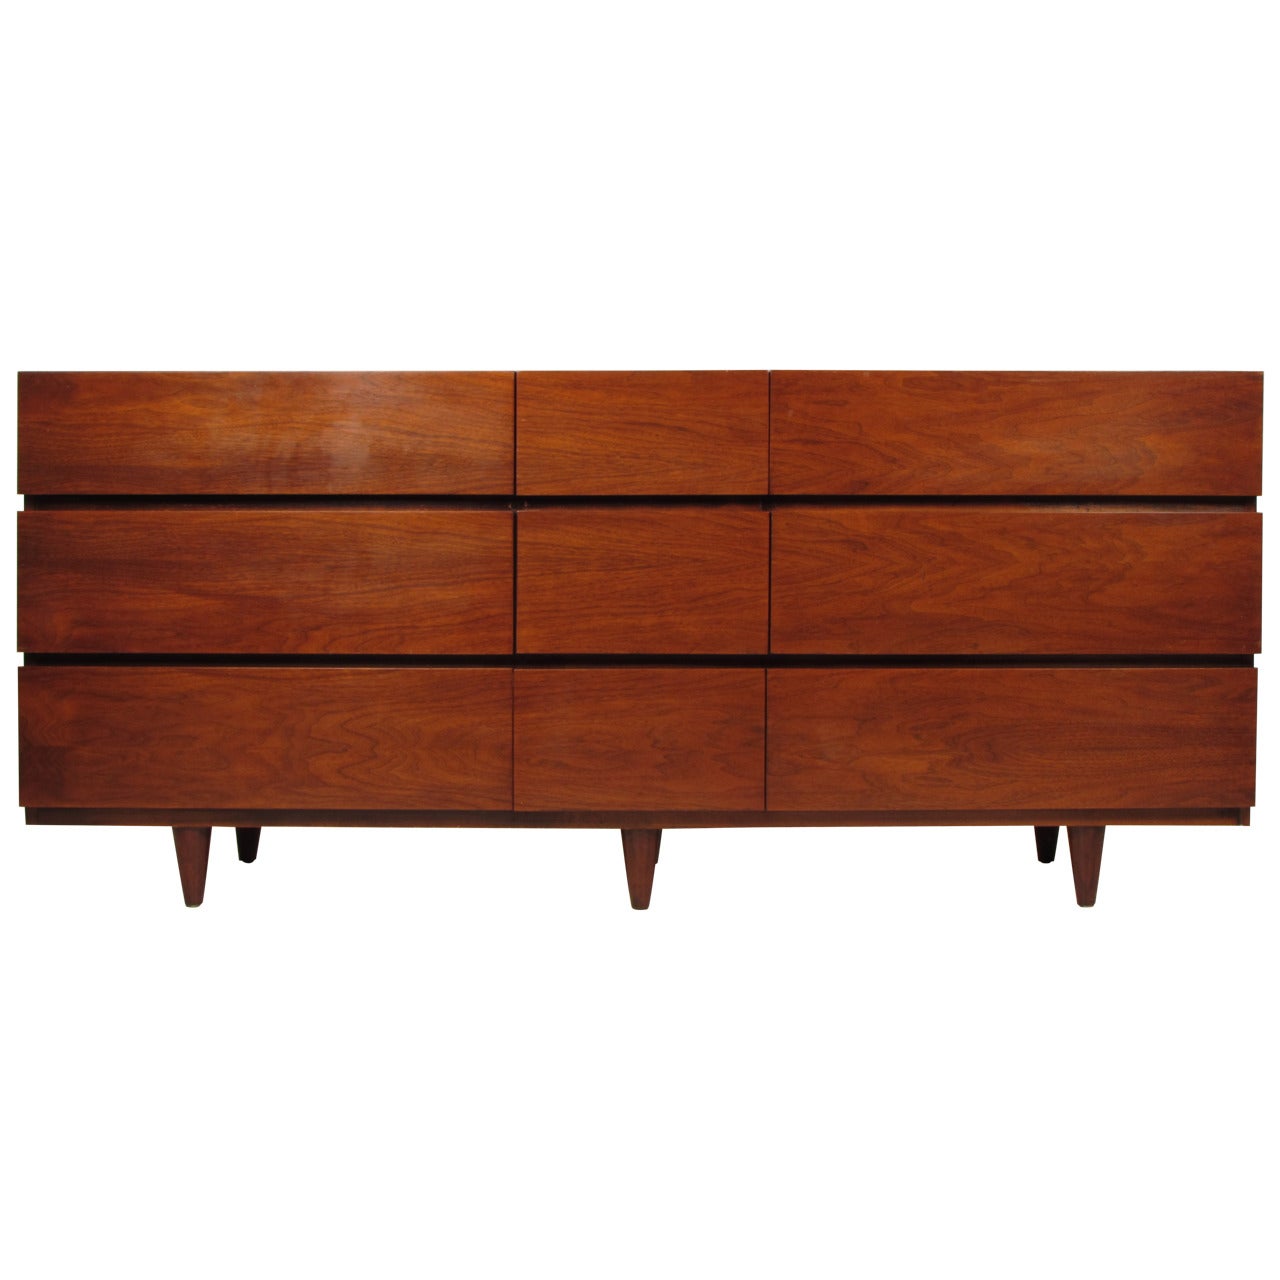 Stately MidCentury 9-Drawer Walnut Chest by American of Martinsville